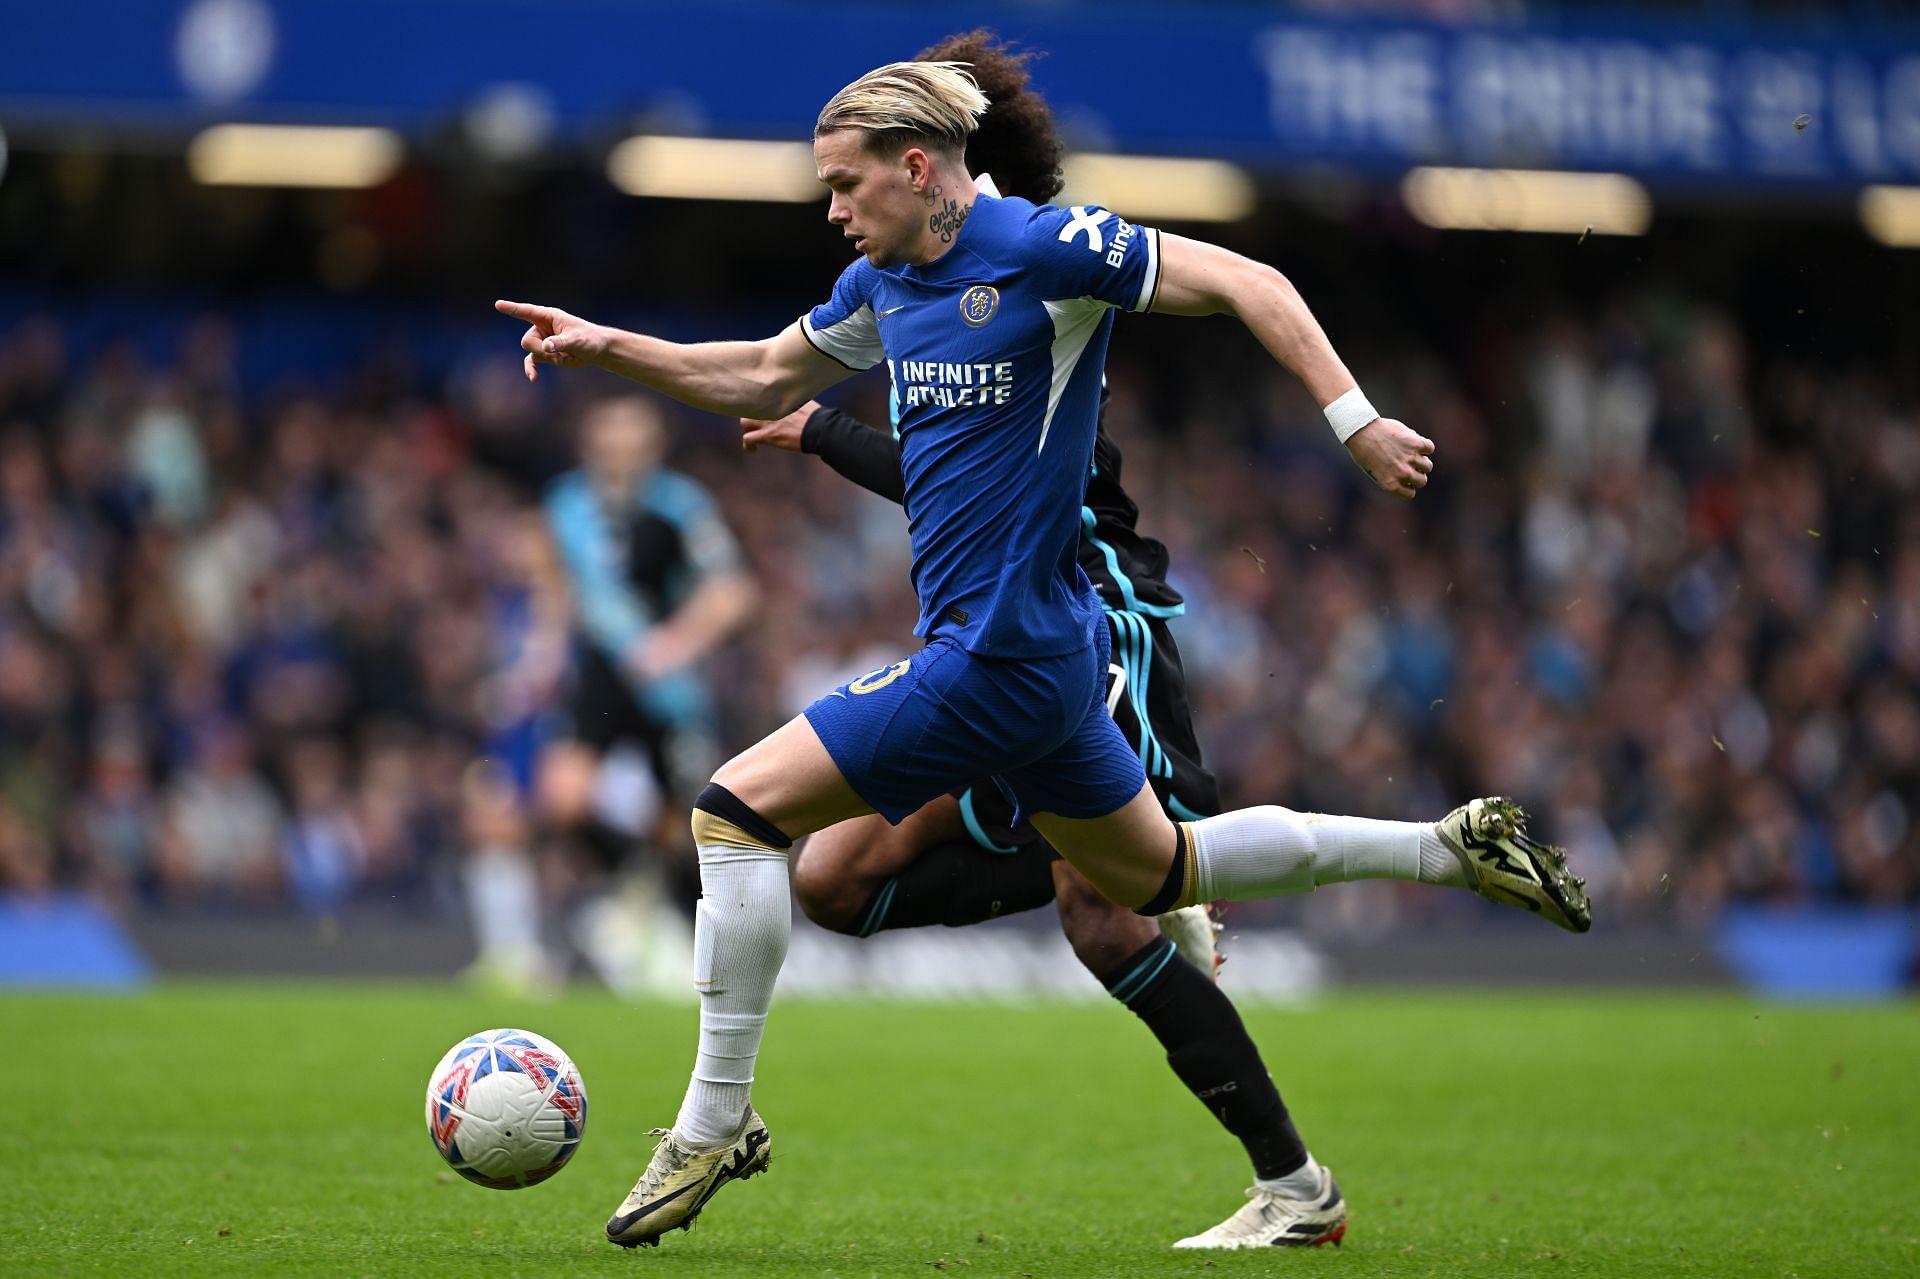 Mykhaylo Mudryk has been a disappointment at Stamford Bridge so far